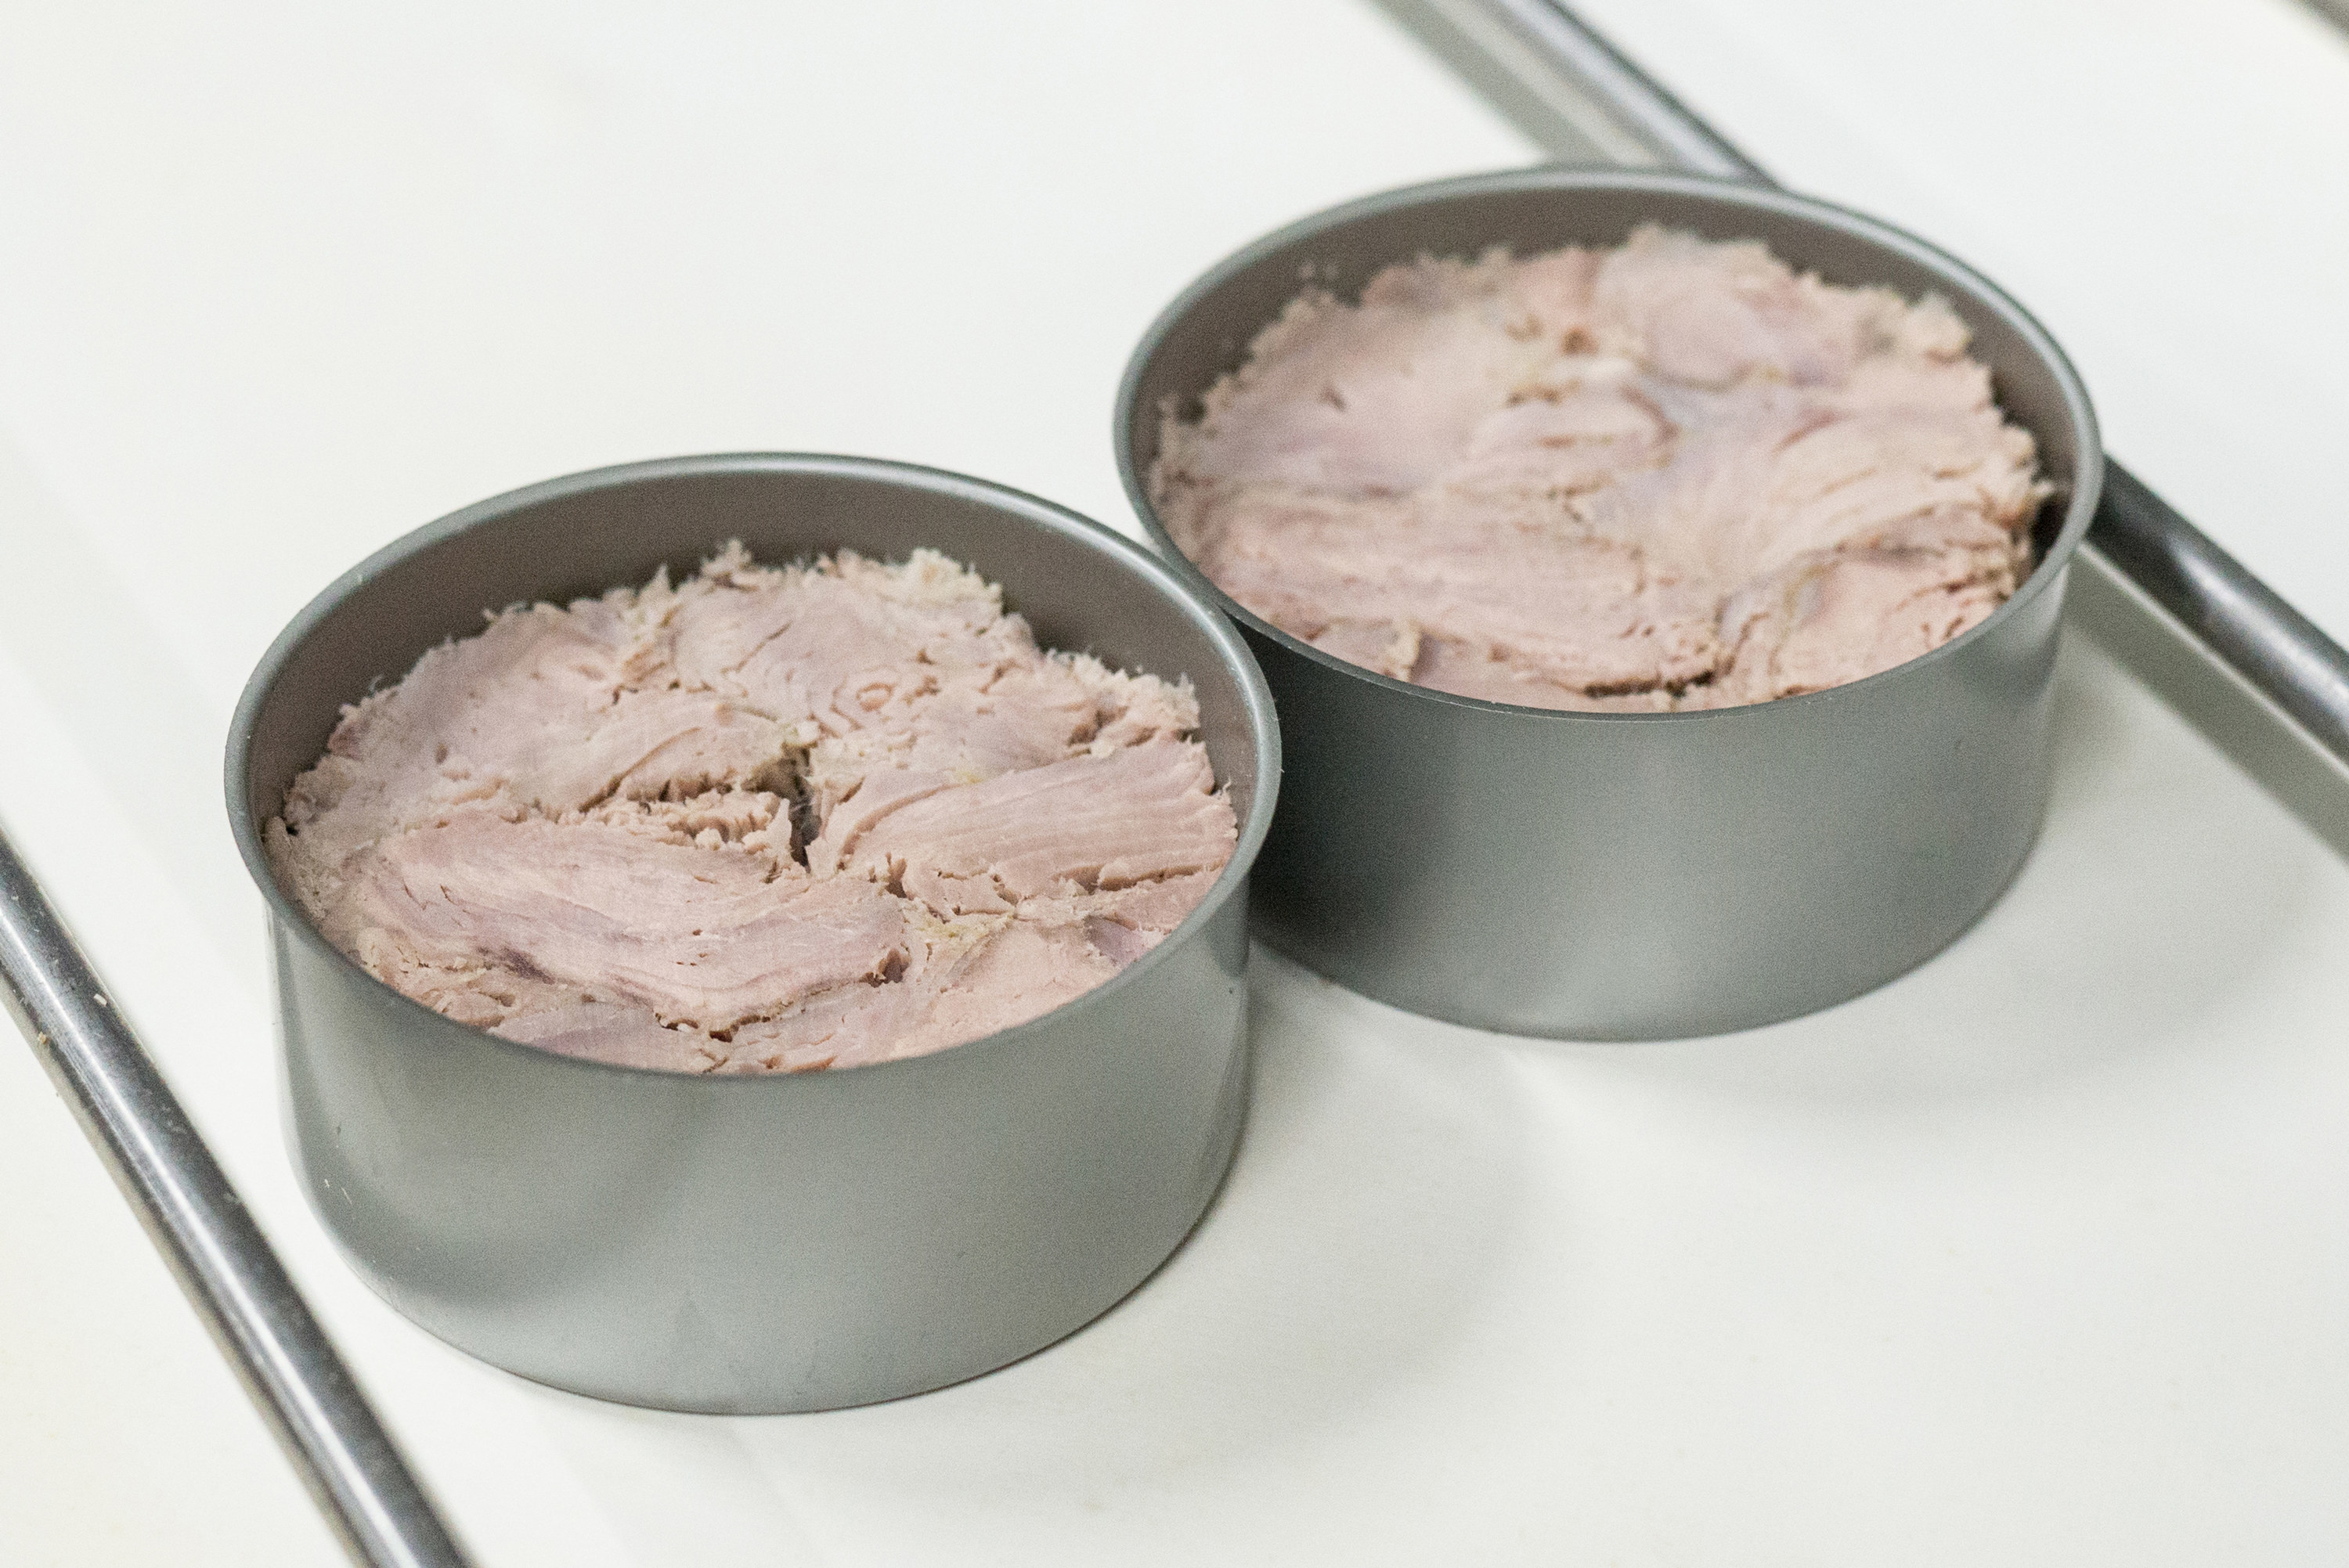 two tins of canned tuna